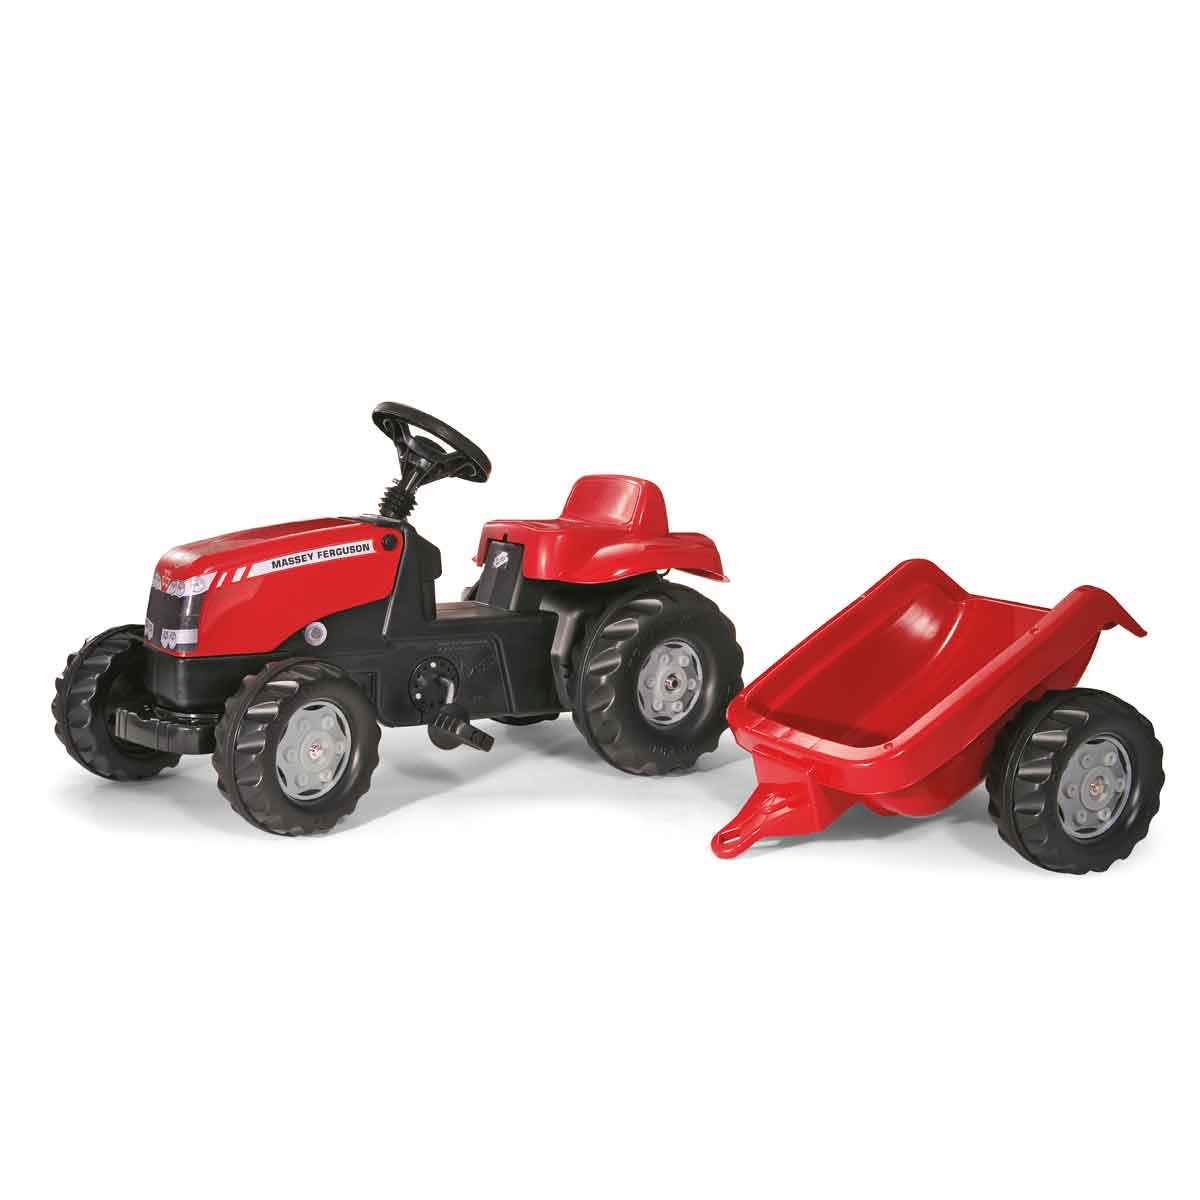 Rolly Toys Massey Ferguson Ride On Tractor and Trailer, red